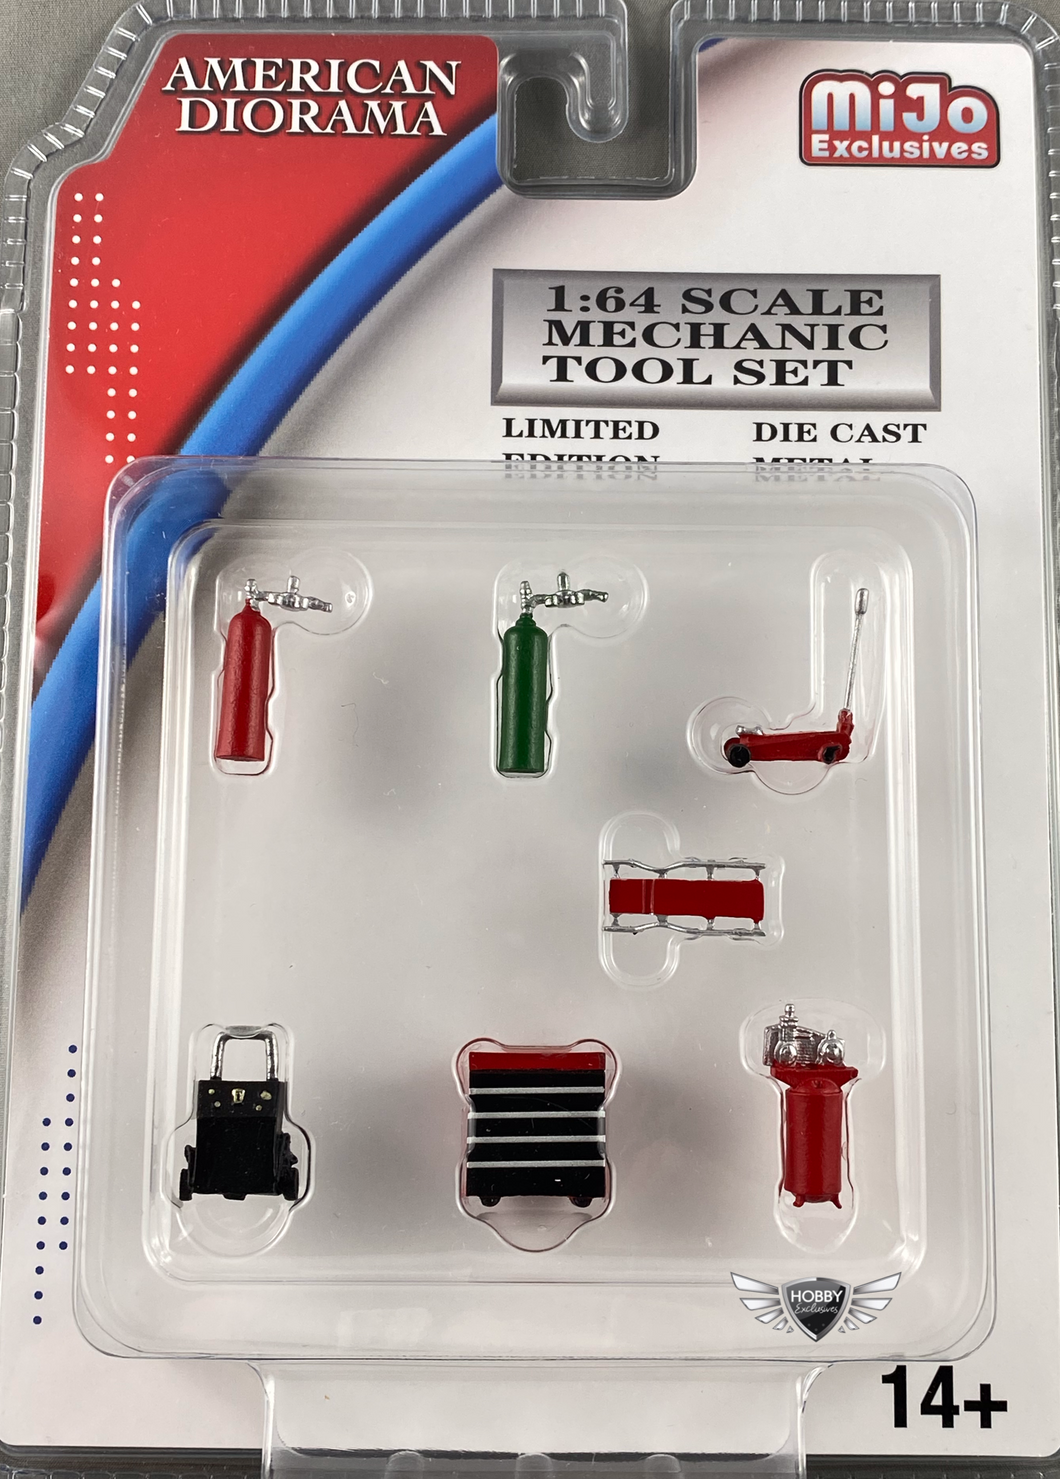 1:64 Scale Mechanic Tool 7 Pieces Set MiJo Exclusives AMERICAN DIORAMA RED